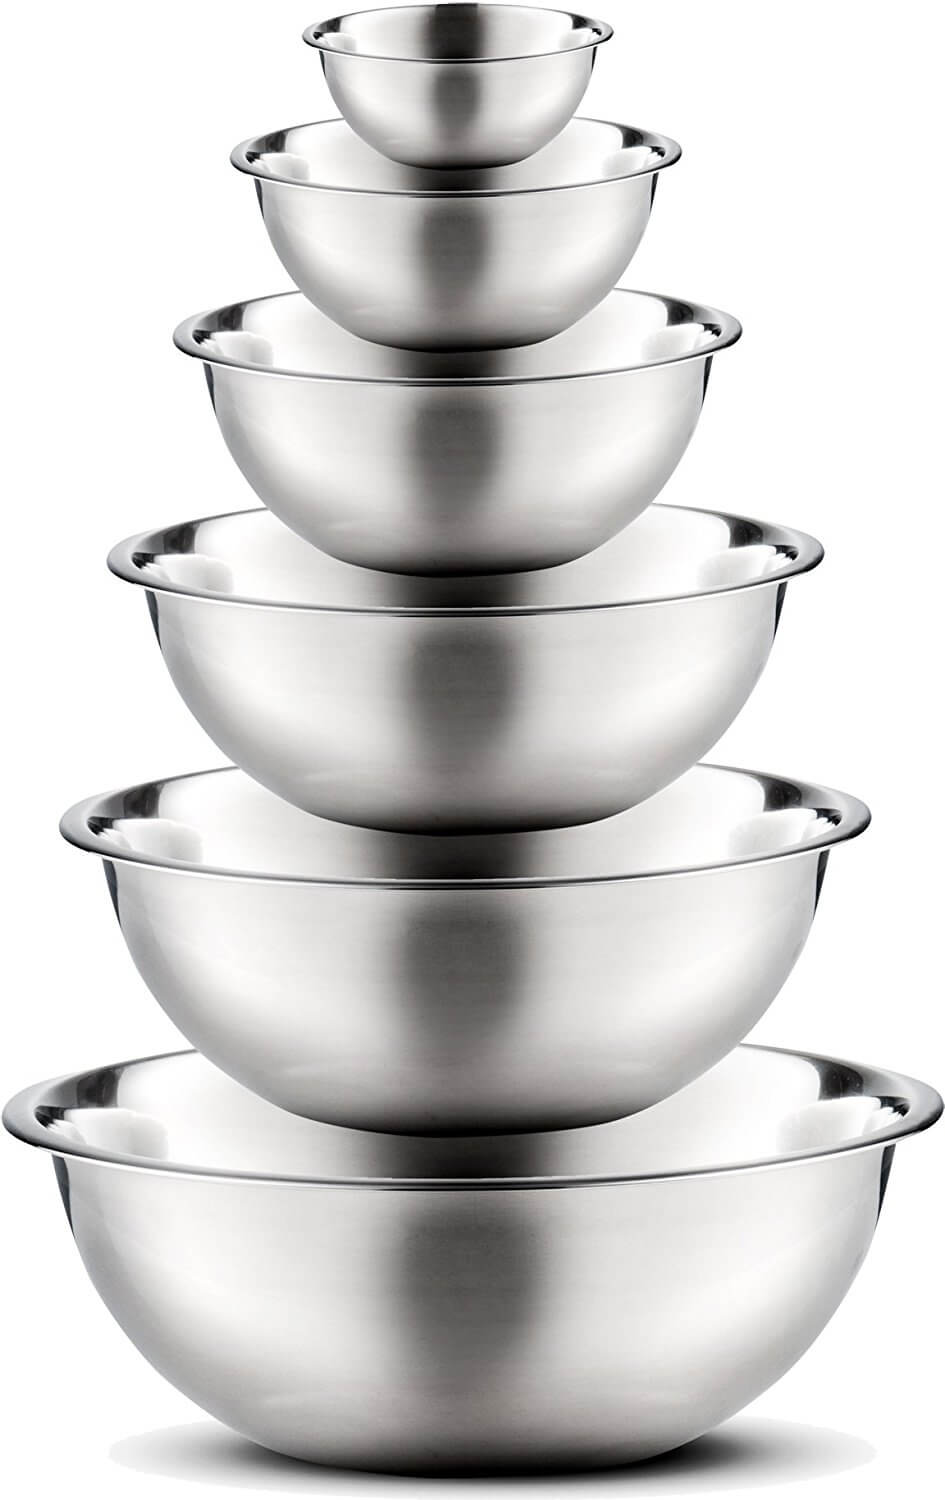 FineDine Superior Glass Mixing Bowls with Lids - 8-Piece Mixing Bowl Set with BPA-Free Lids Space-Saving Nesting Bowls - Easy Grip & Stable Design